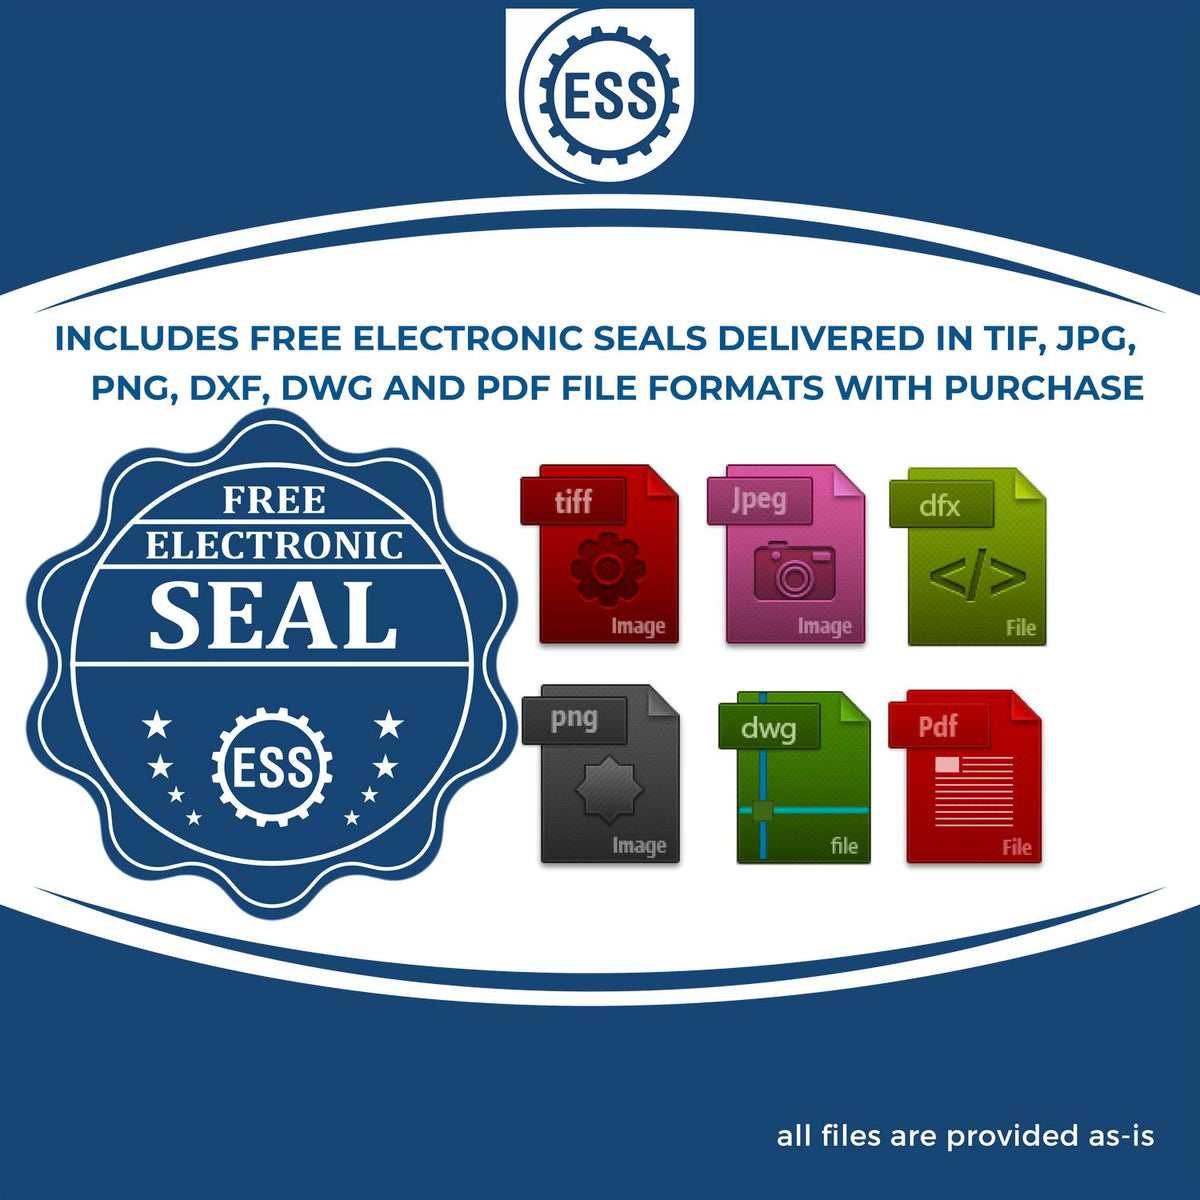 An infographic for the free electronic seal for the Heavy Duty Cast Iron Hawaii Architect Embosser illustrating the different file type icons such as DXF, DWG, TIF, JPG and PNG.